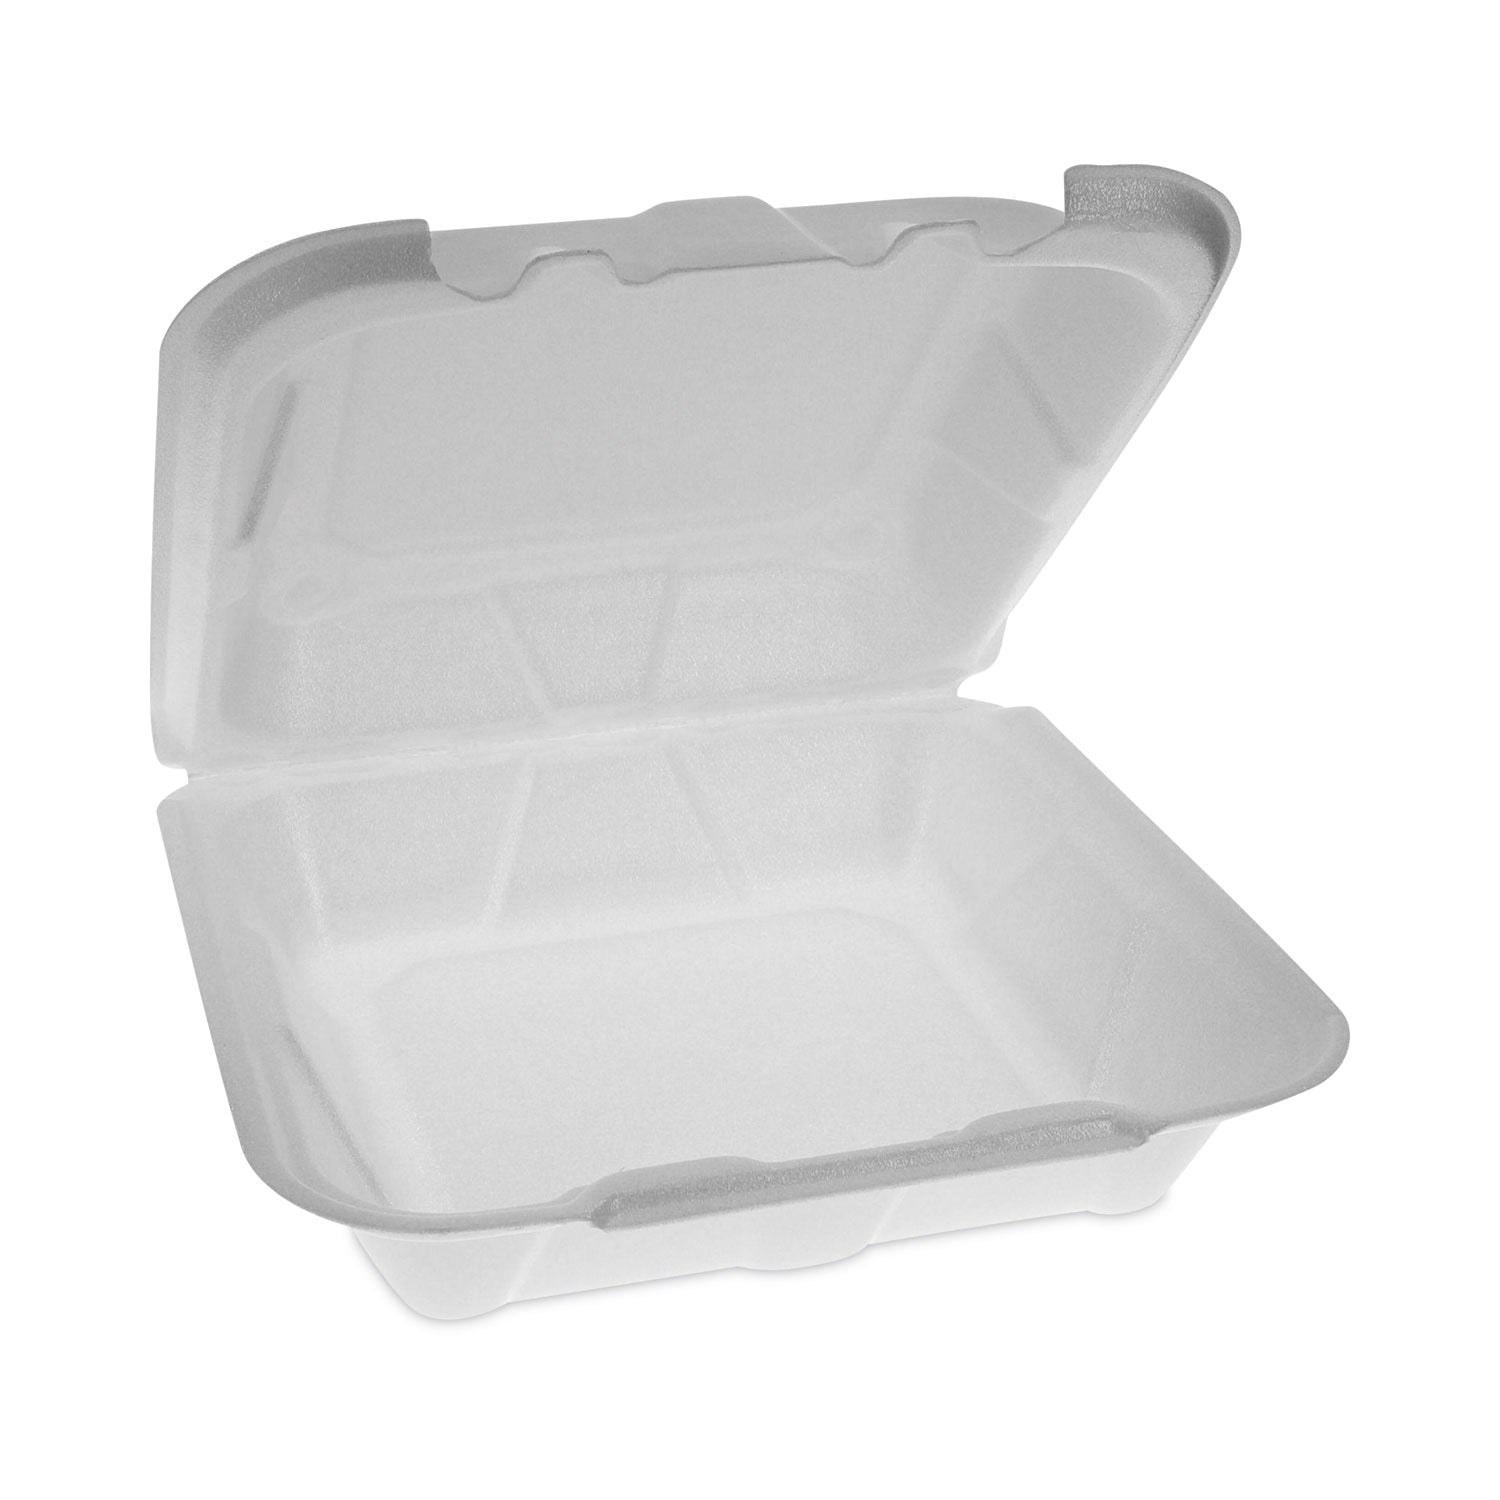 vented-foam-hinged-lid-container-dual-tab-lock-economy-842-x-815-x-3-white-150-carton_pctytd18801econ - 2